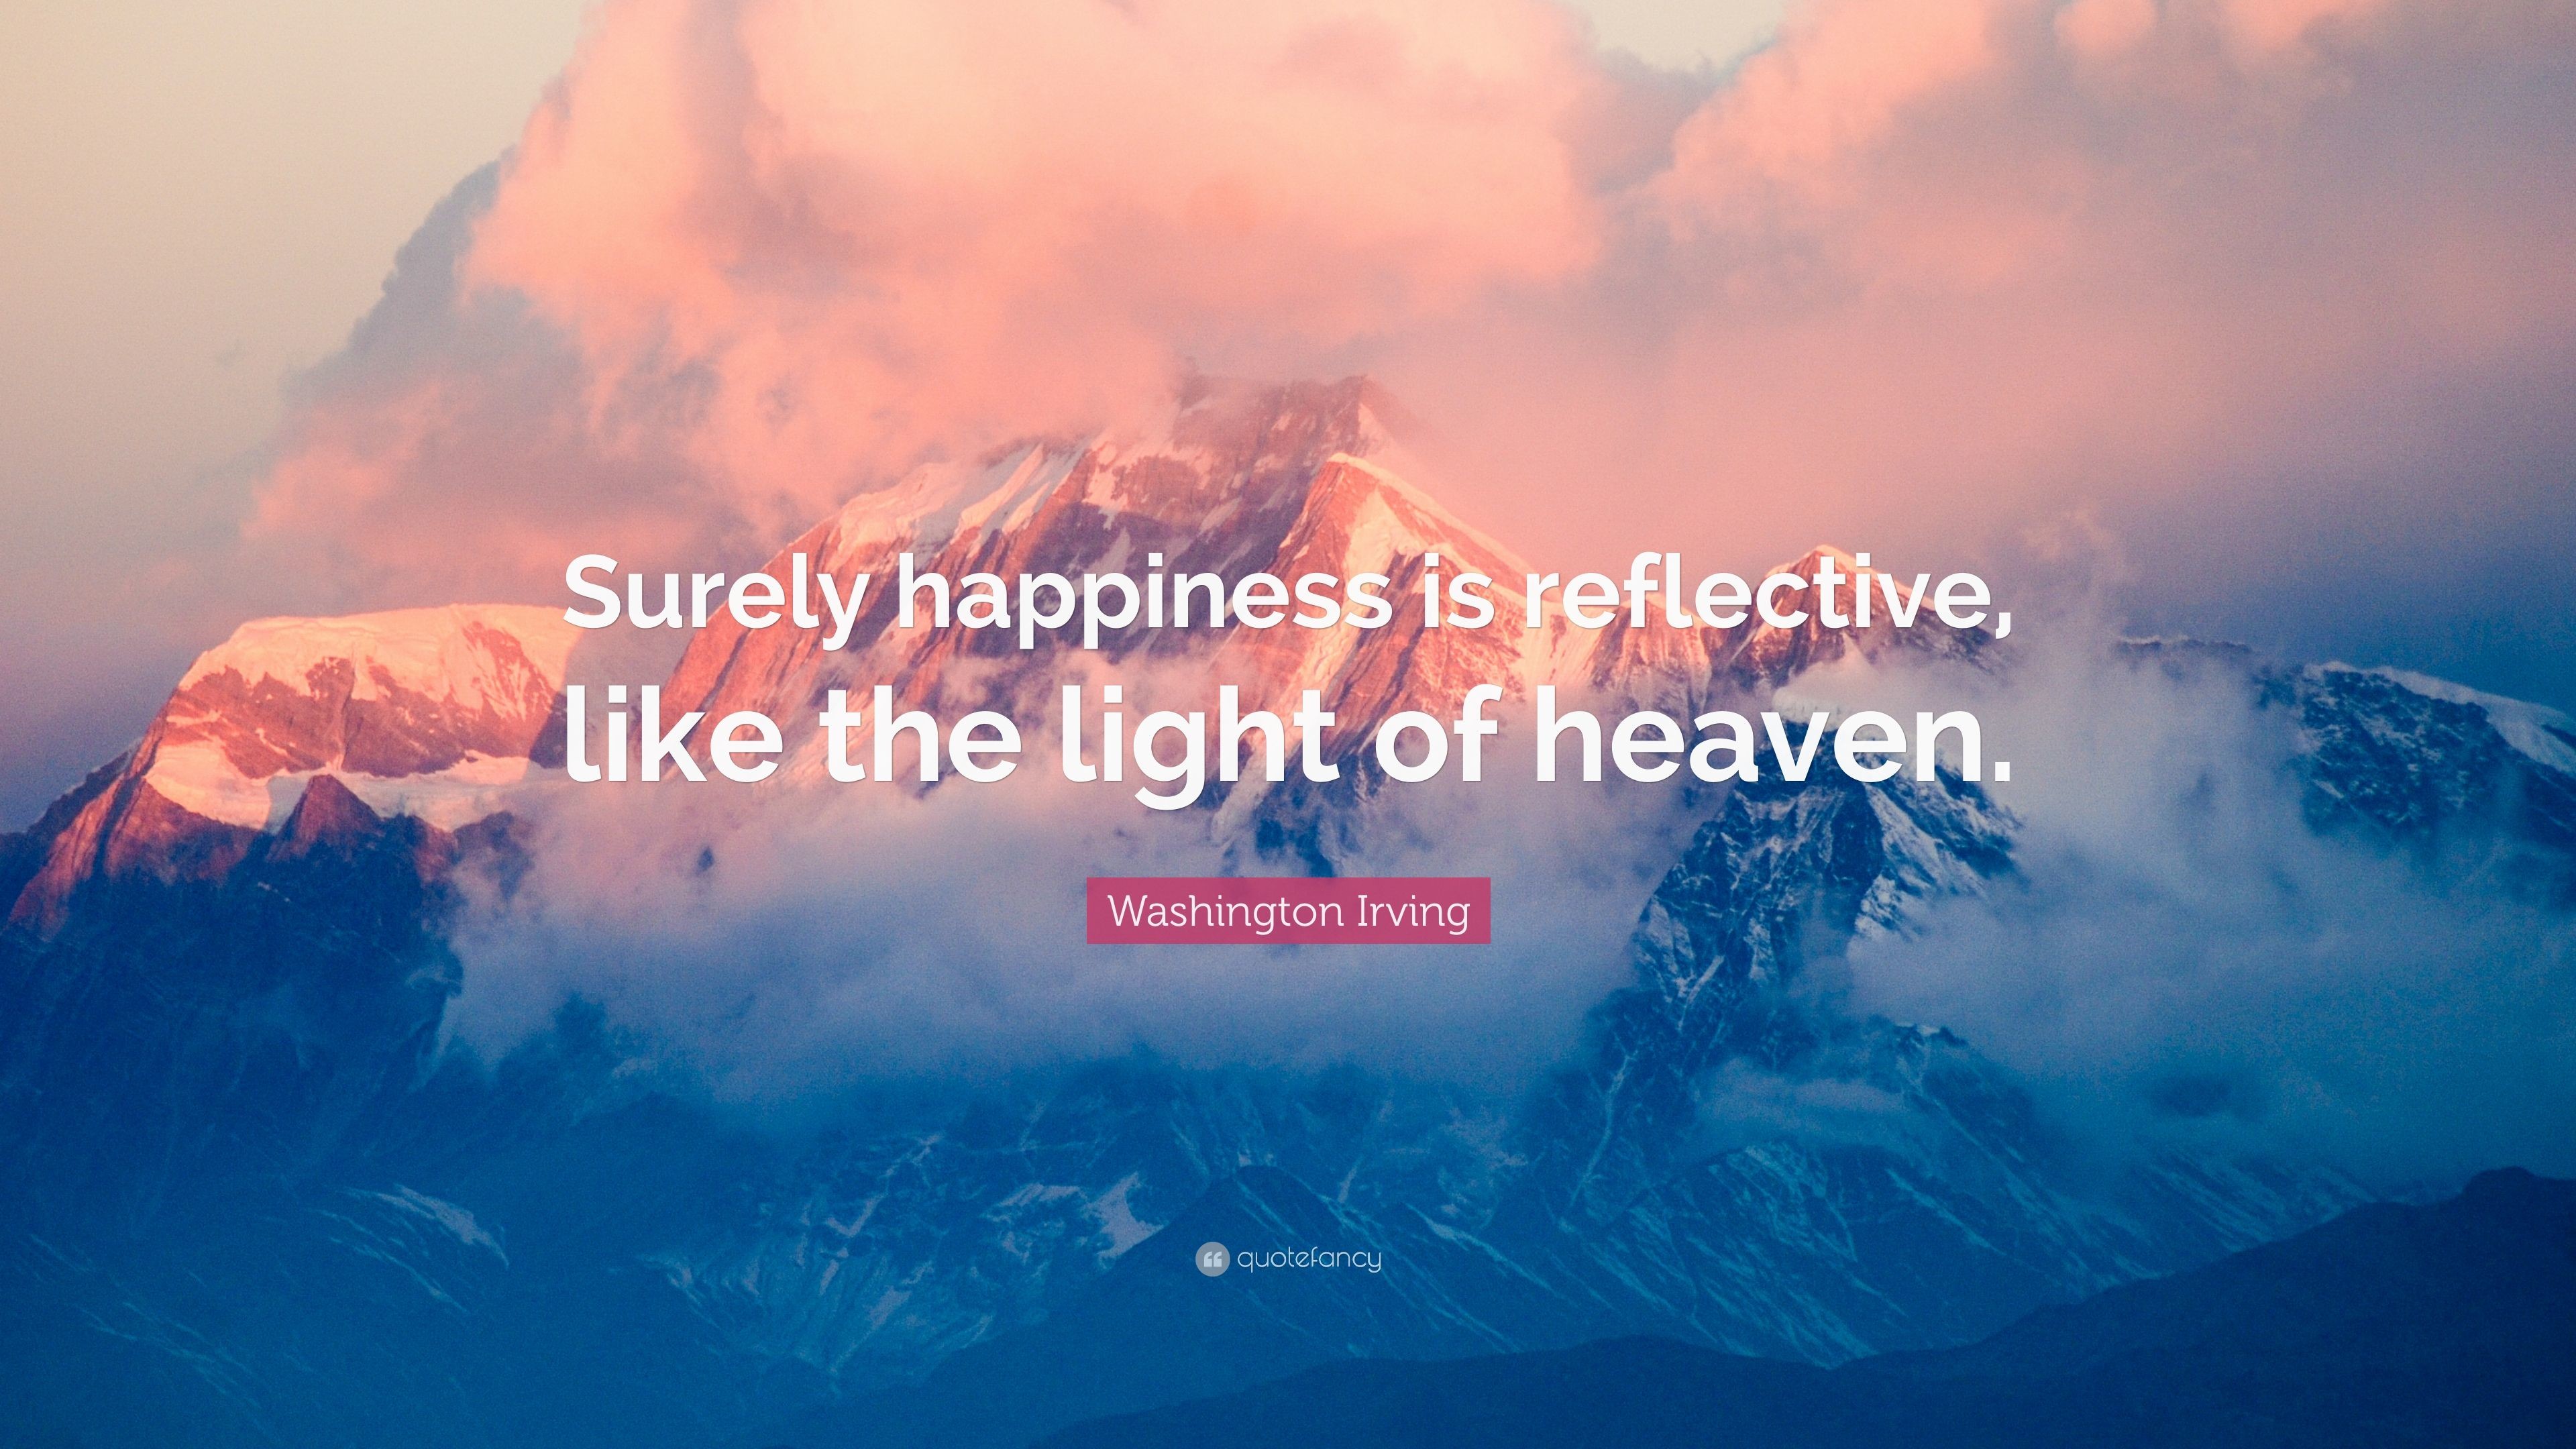 3840x2160 Washington Irving Quote: “Surely happiness is reflective, like the light of  heaven.